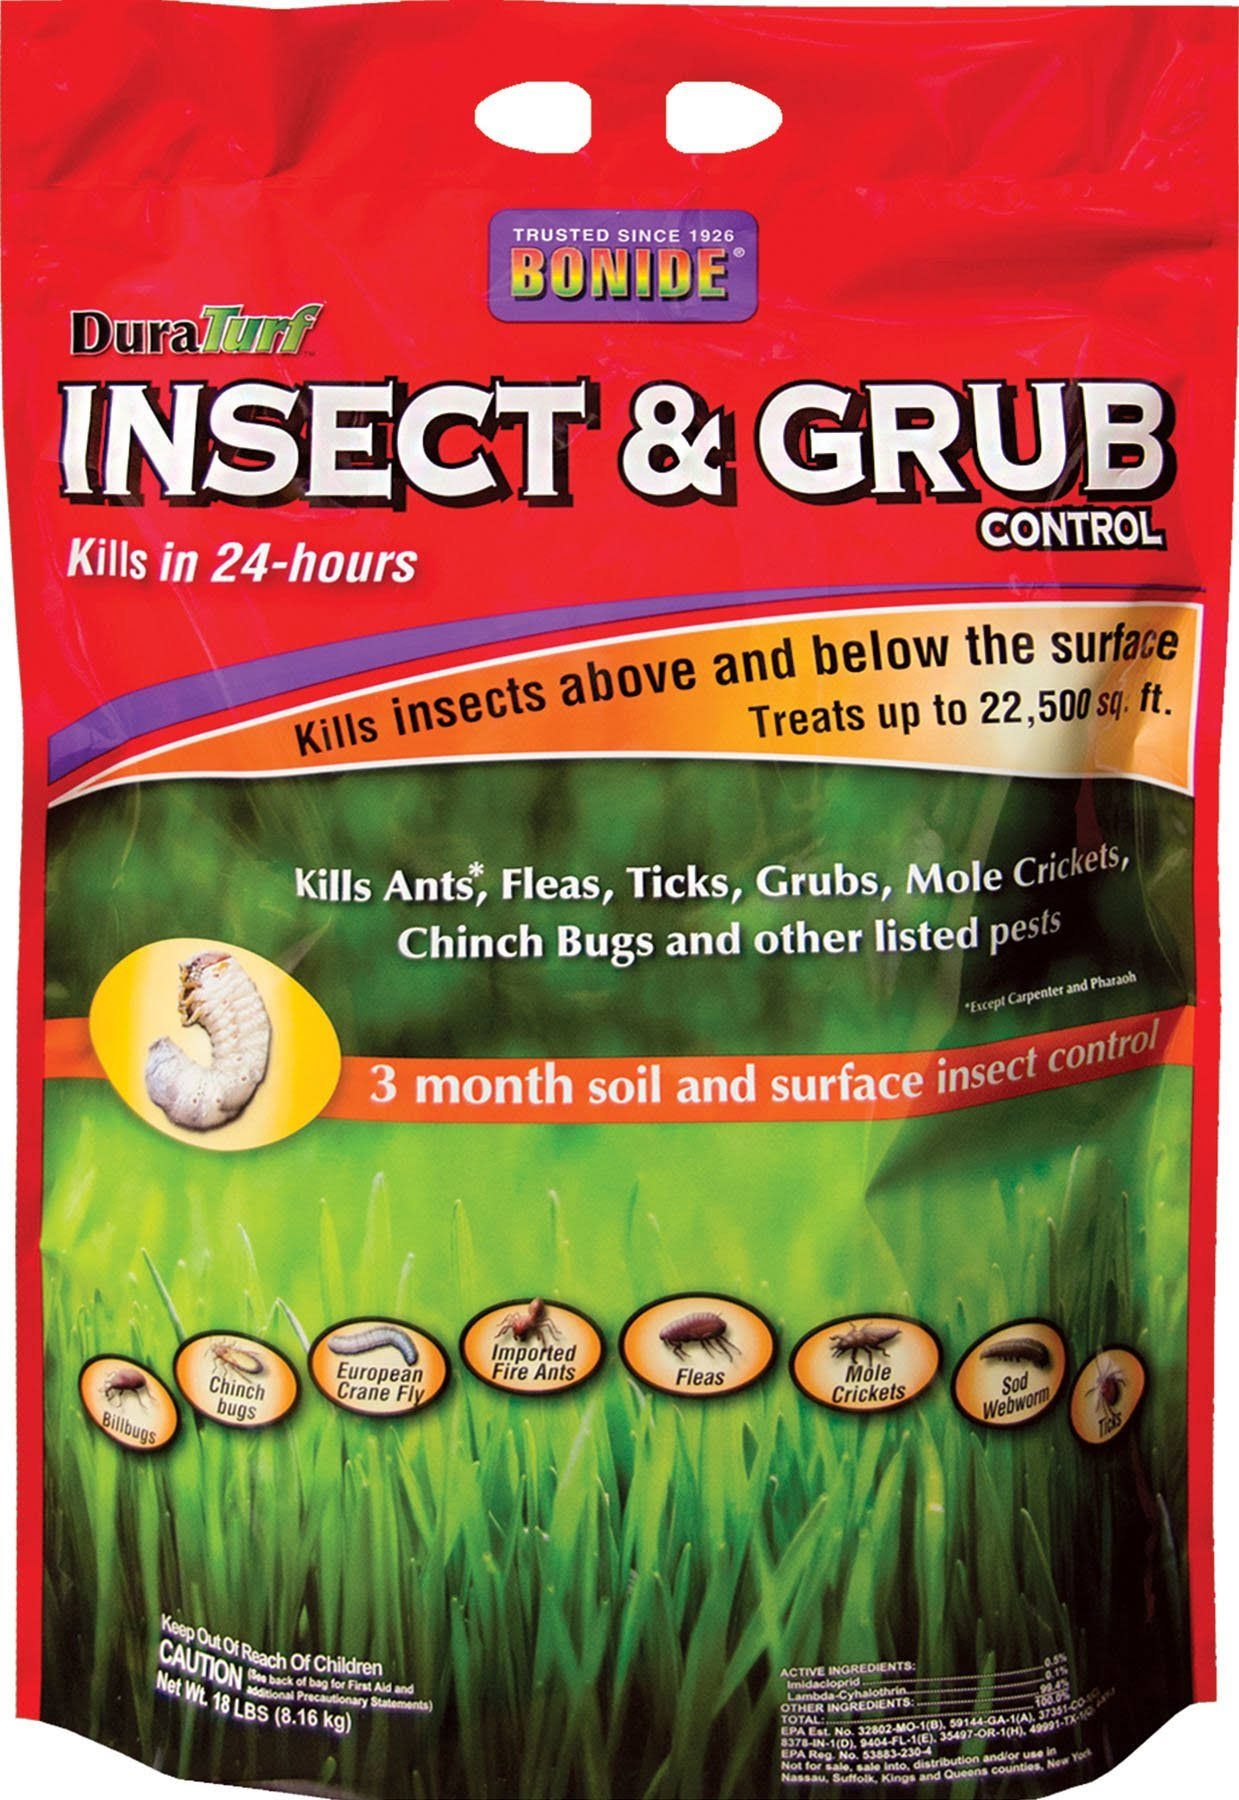 DuraTurf Insect and Grub Control - 6lb